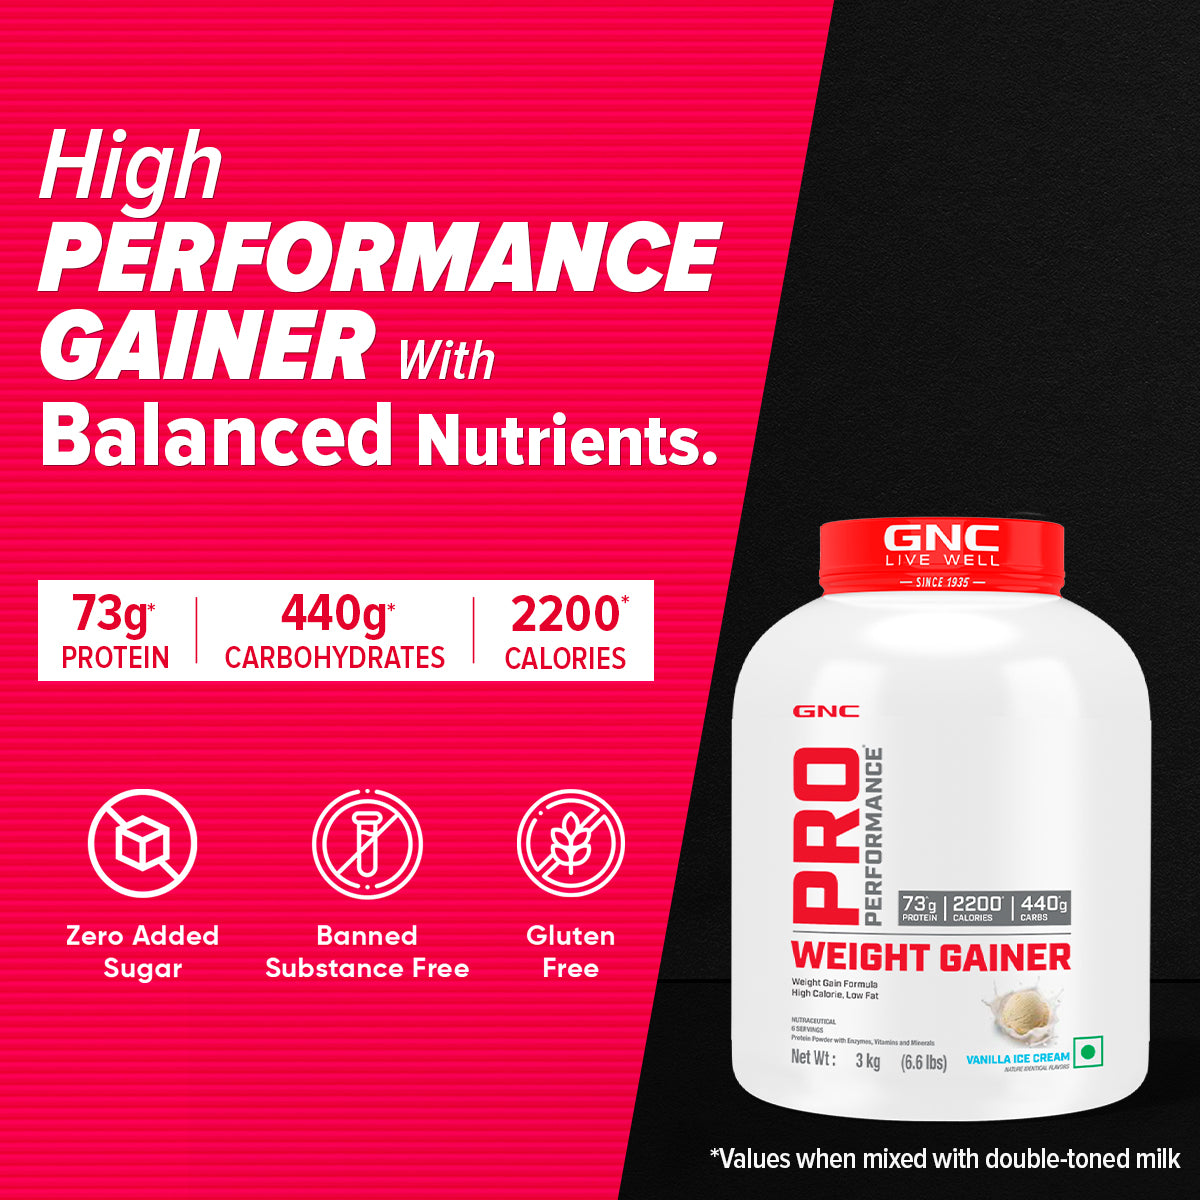 GNC Pro Performance Weight Gainer - High-Calorie, Low-Fat Formula For Healthy Body Gains